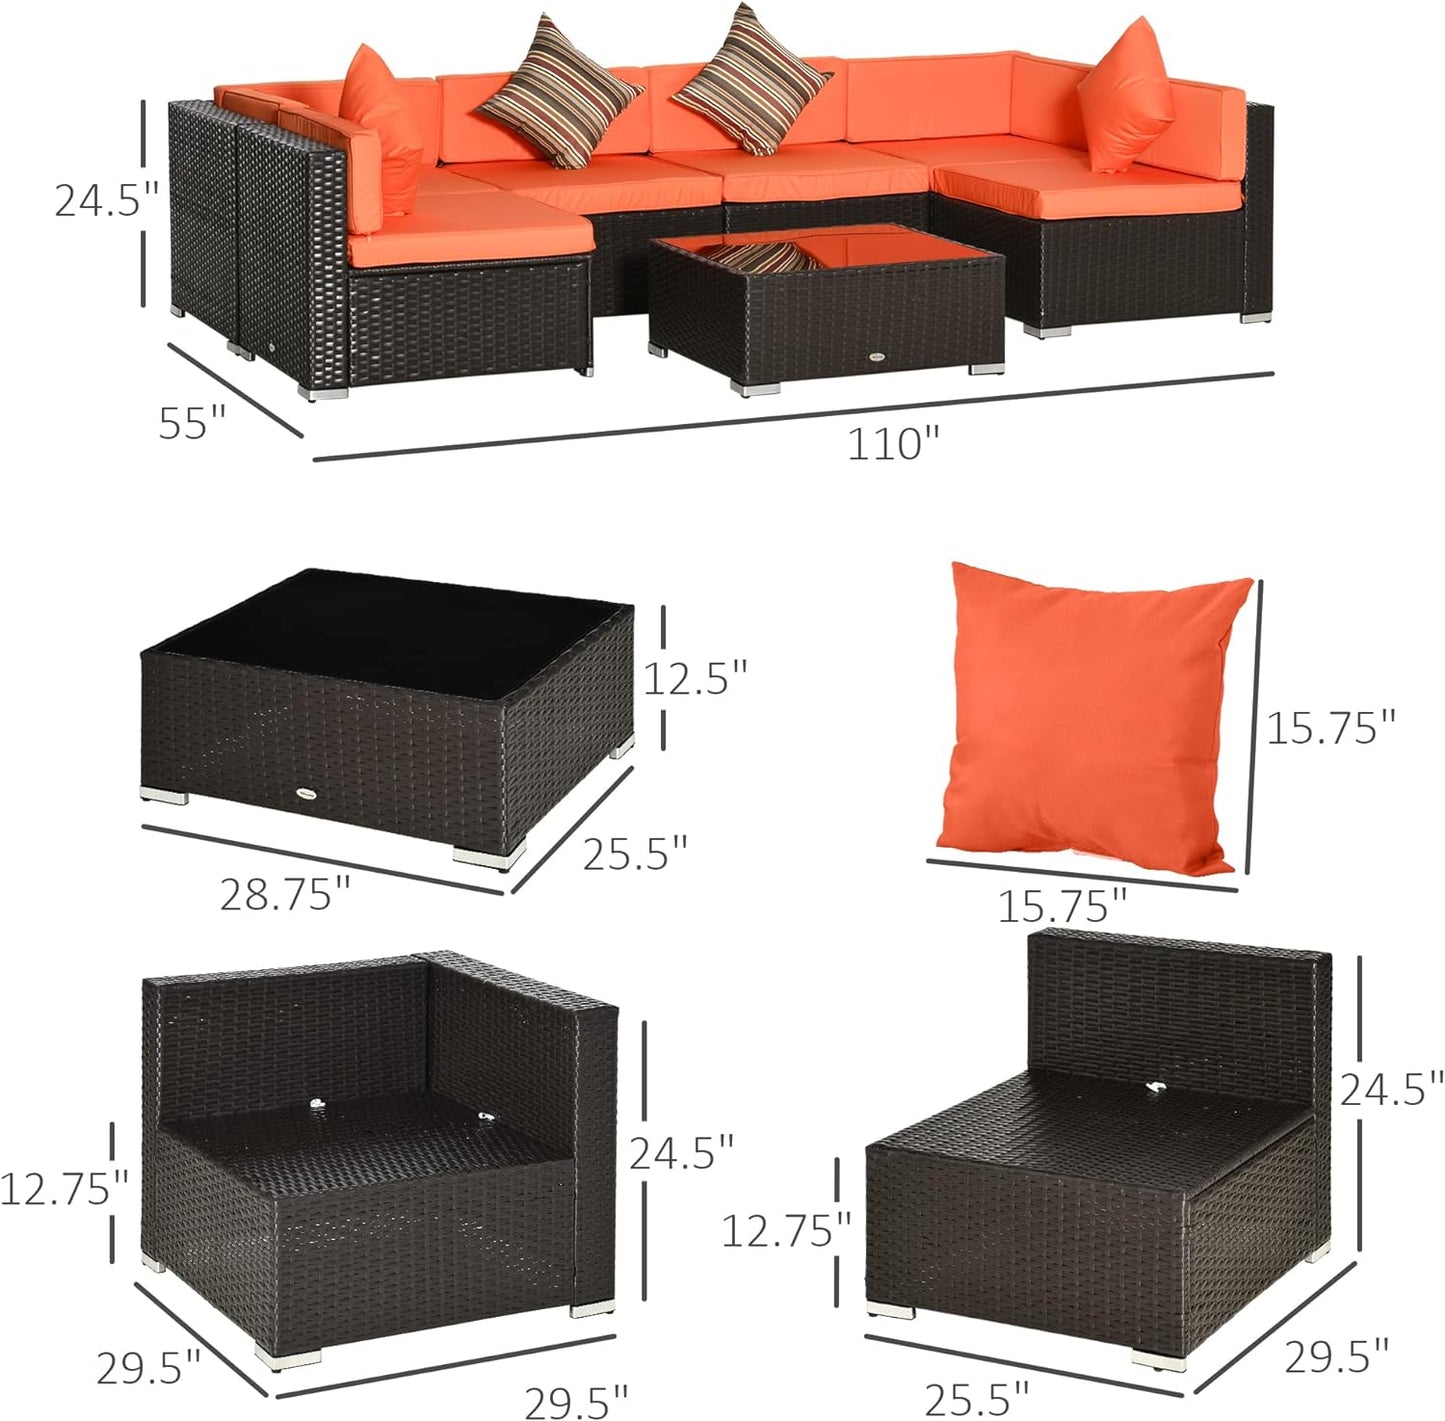 7 Piece Patio Furniture Set, PE Rattan Outdoor Conversation Set with Sectional Sofa, Glass Tabletop, Cushions and Pillows for Garden, Lawn, Deck, Coffee and Orange